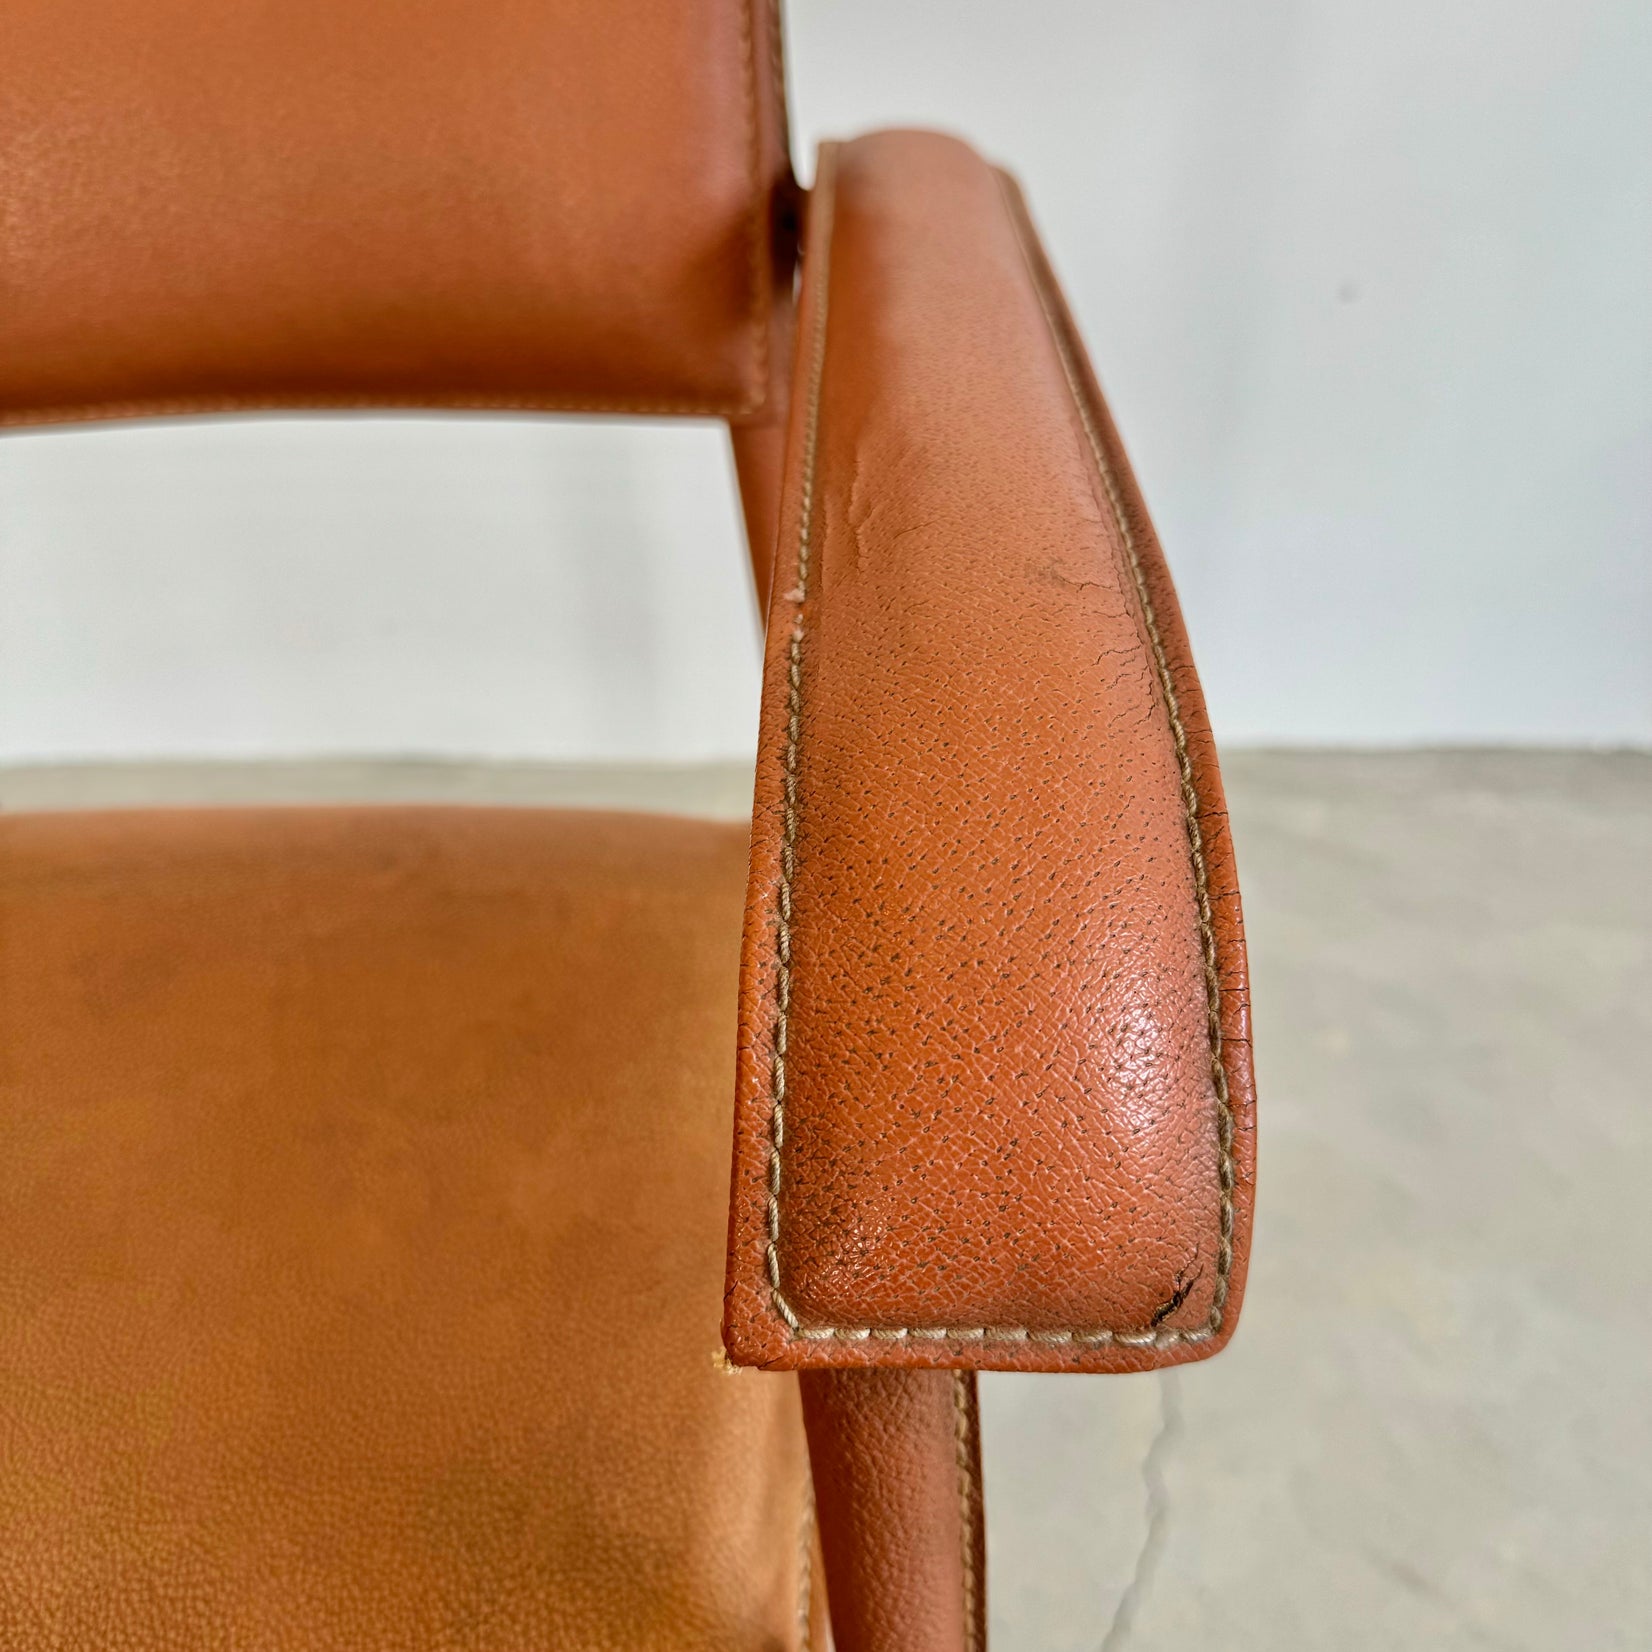 Jacques Adnet Leather Armchair, 1950s France